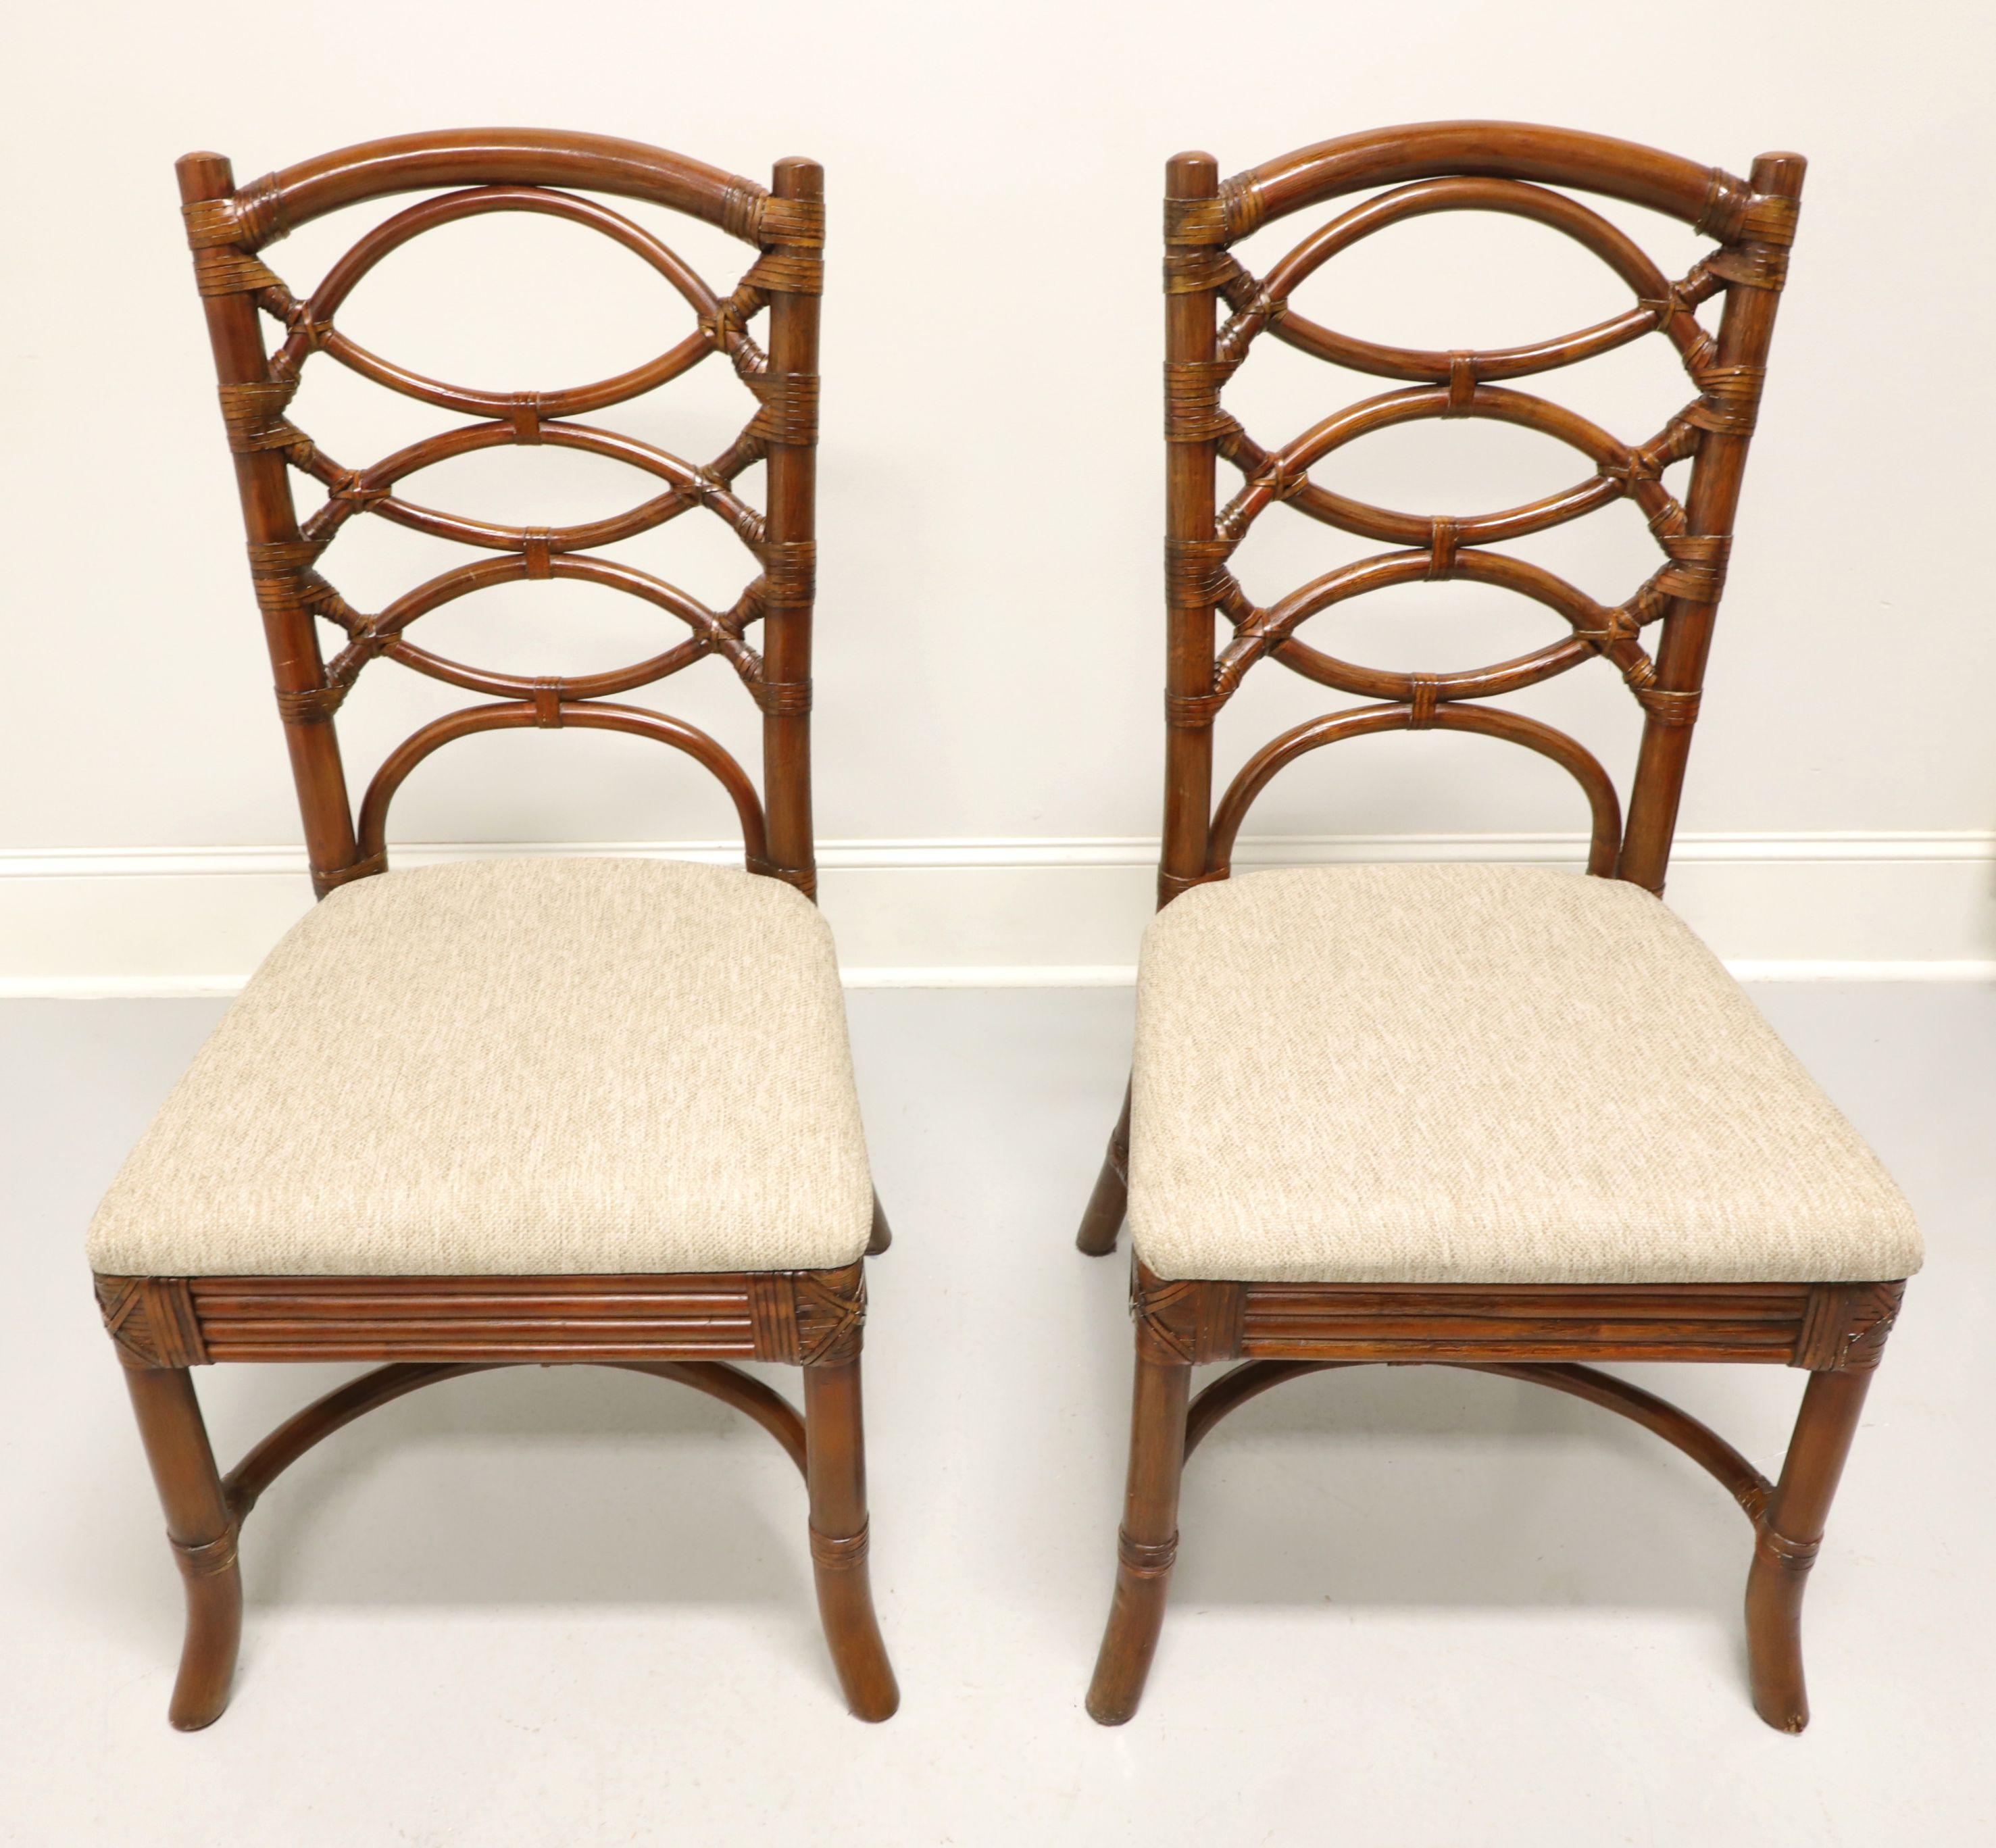 A pair of Asian influenced dining side chairs, unbranded. Faux bamboo with rattan strapping, circular design backrest, neutral color fabric upholstered seat, decorative apron, flared legs and curved stretchers. Likely made in Eastern Asia, in the